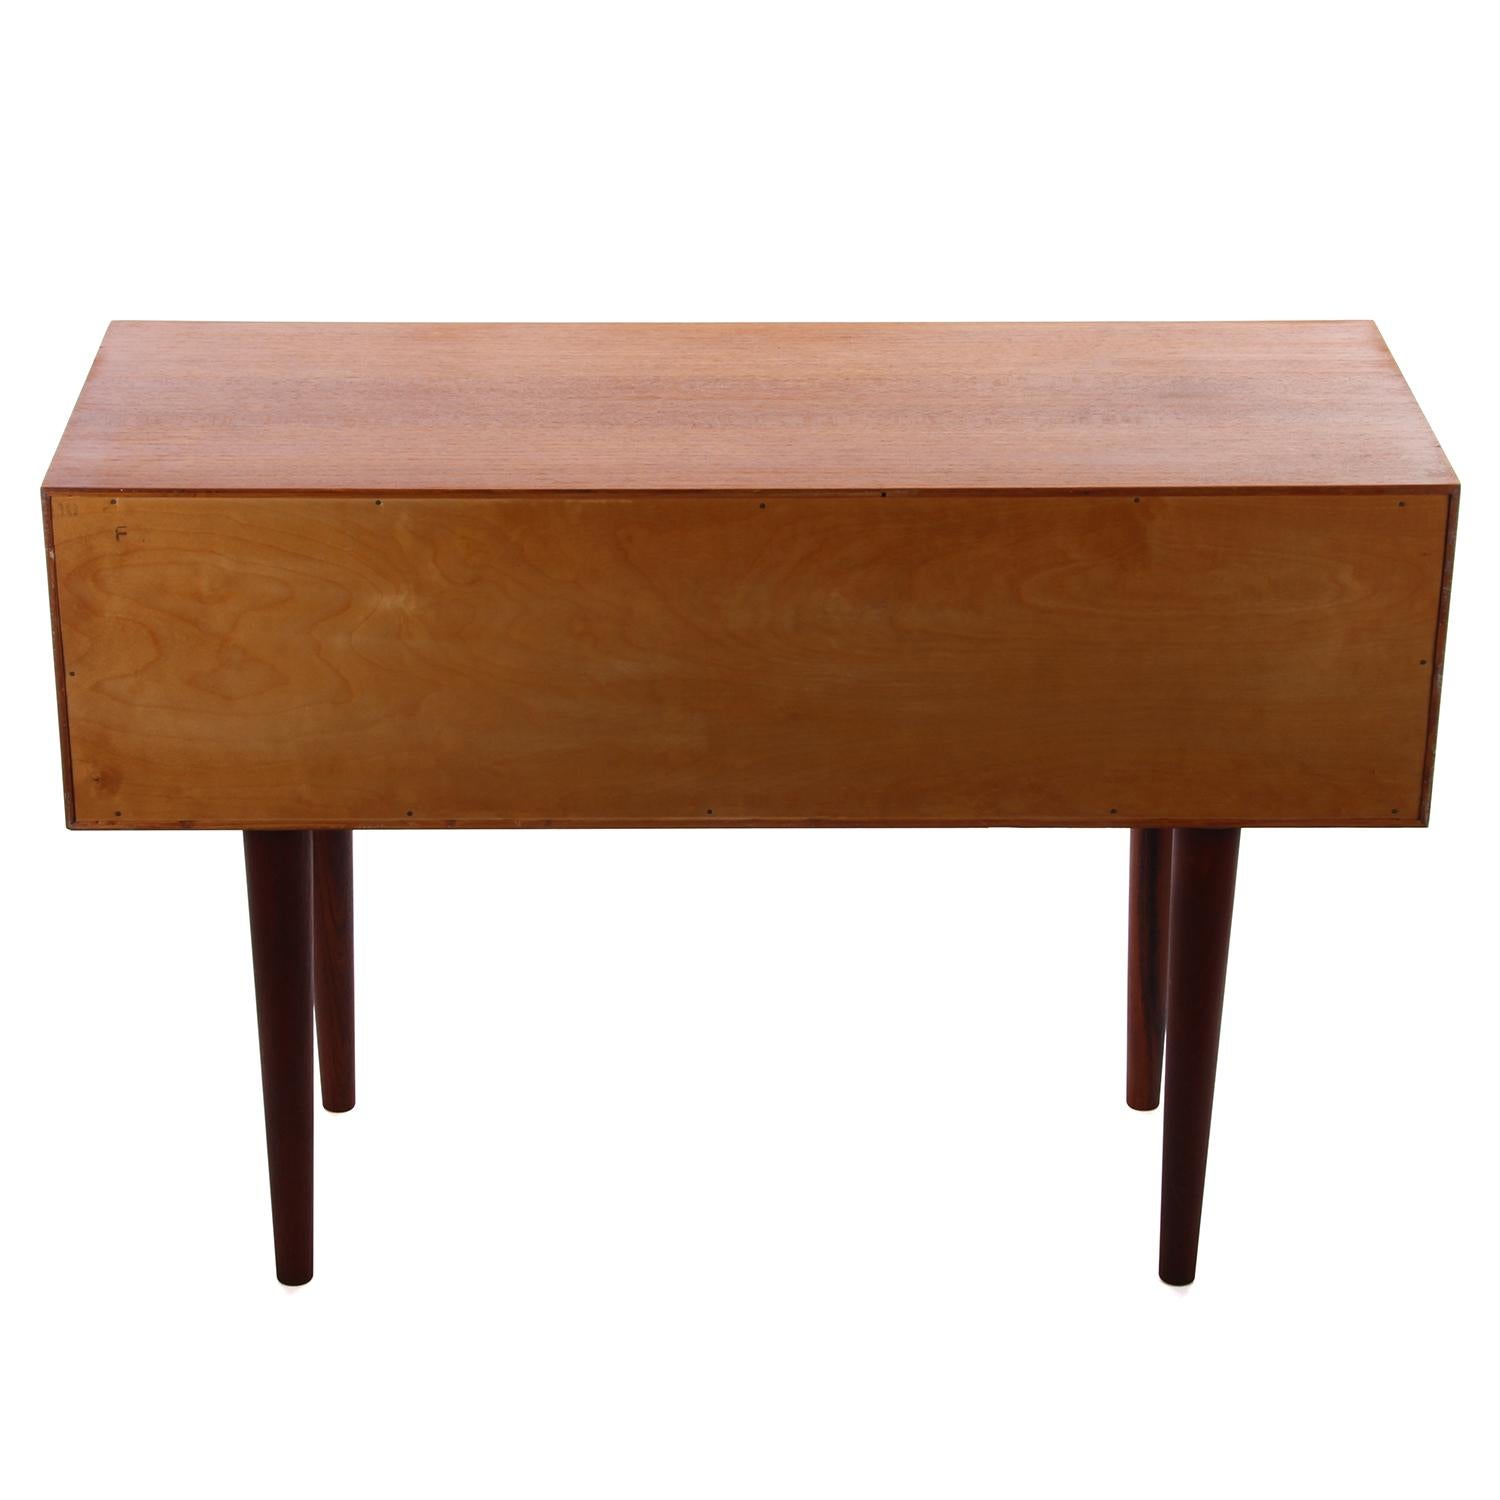 Mid-20th Century Entry Table by Kai Kristiansen for FM Furniture, Danish Entryway Table